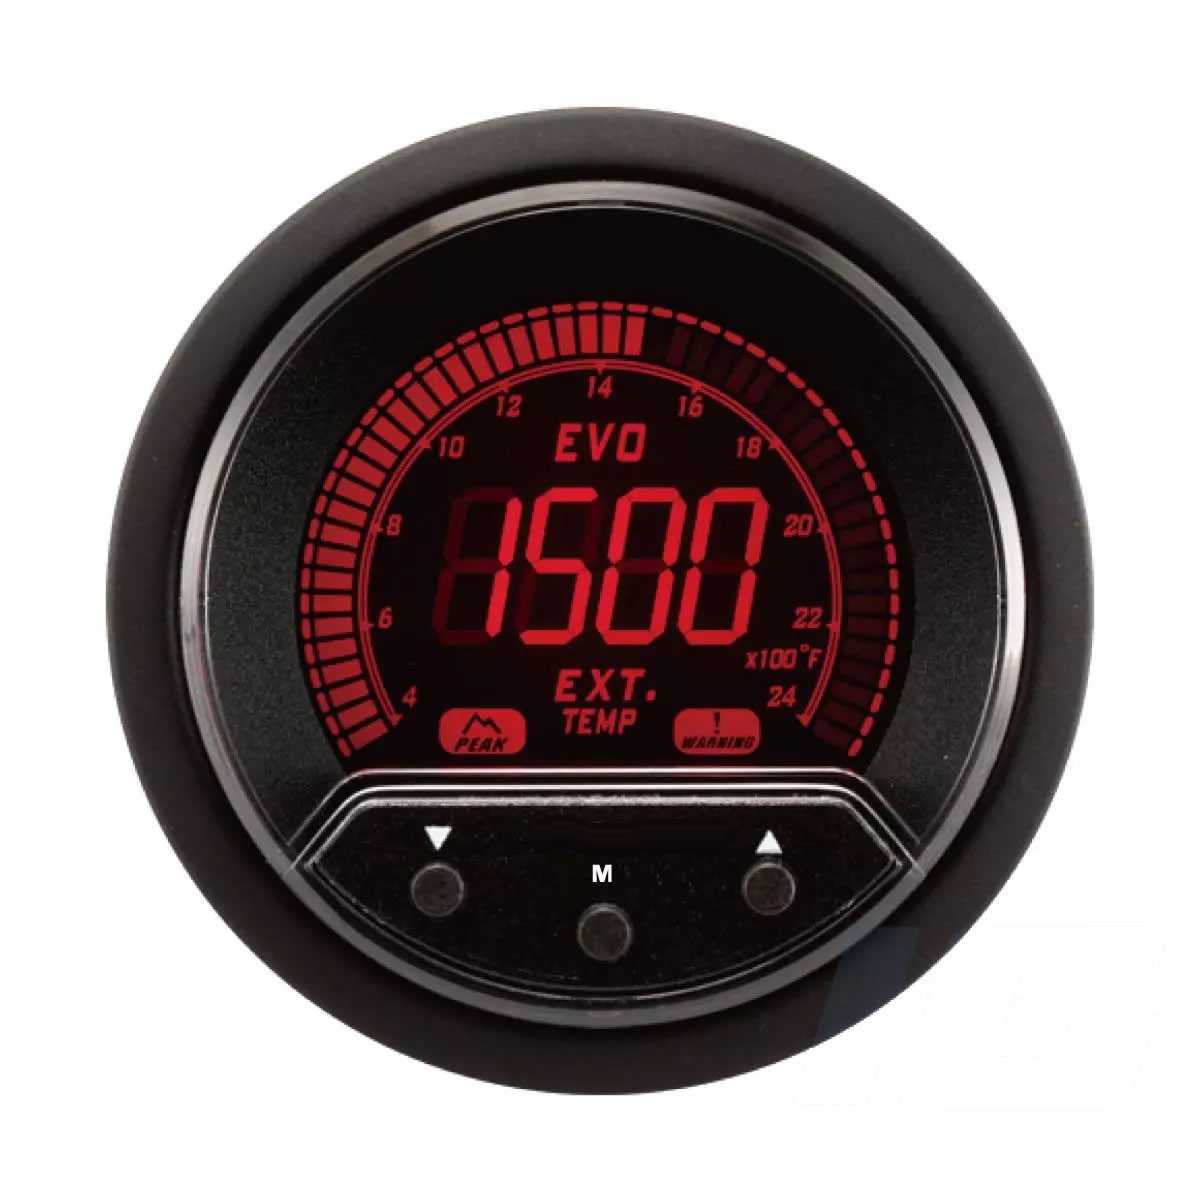 52mm LCD Performance Car Gauges - Exhaust Gas Temp Gauge With Sensor and Warning and Peak For Your Sport Racing Car